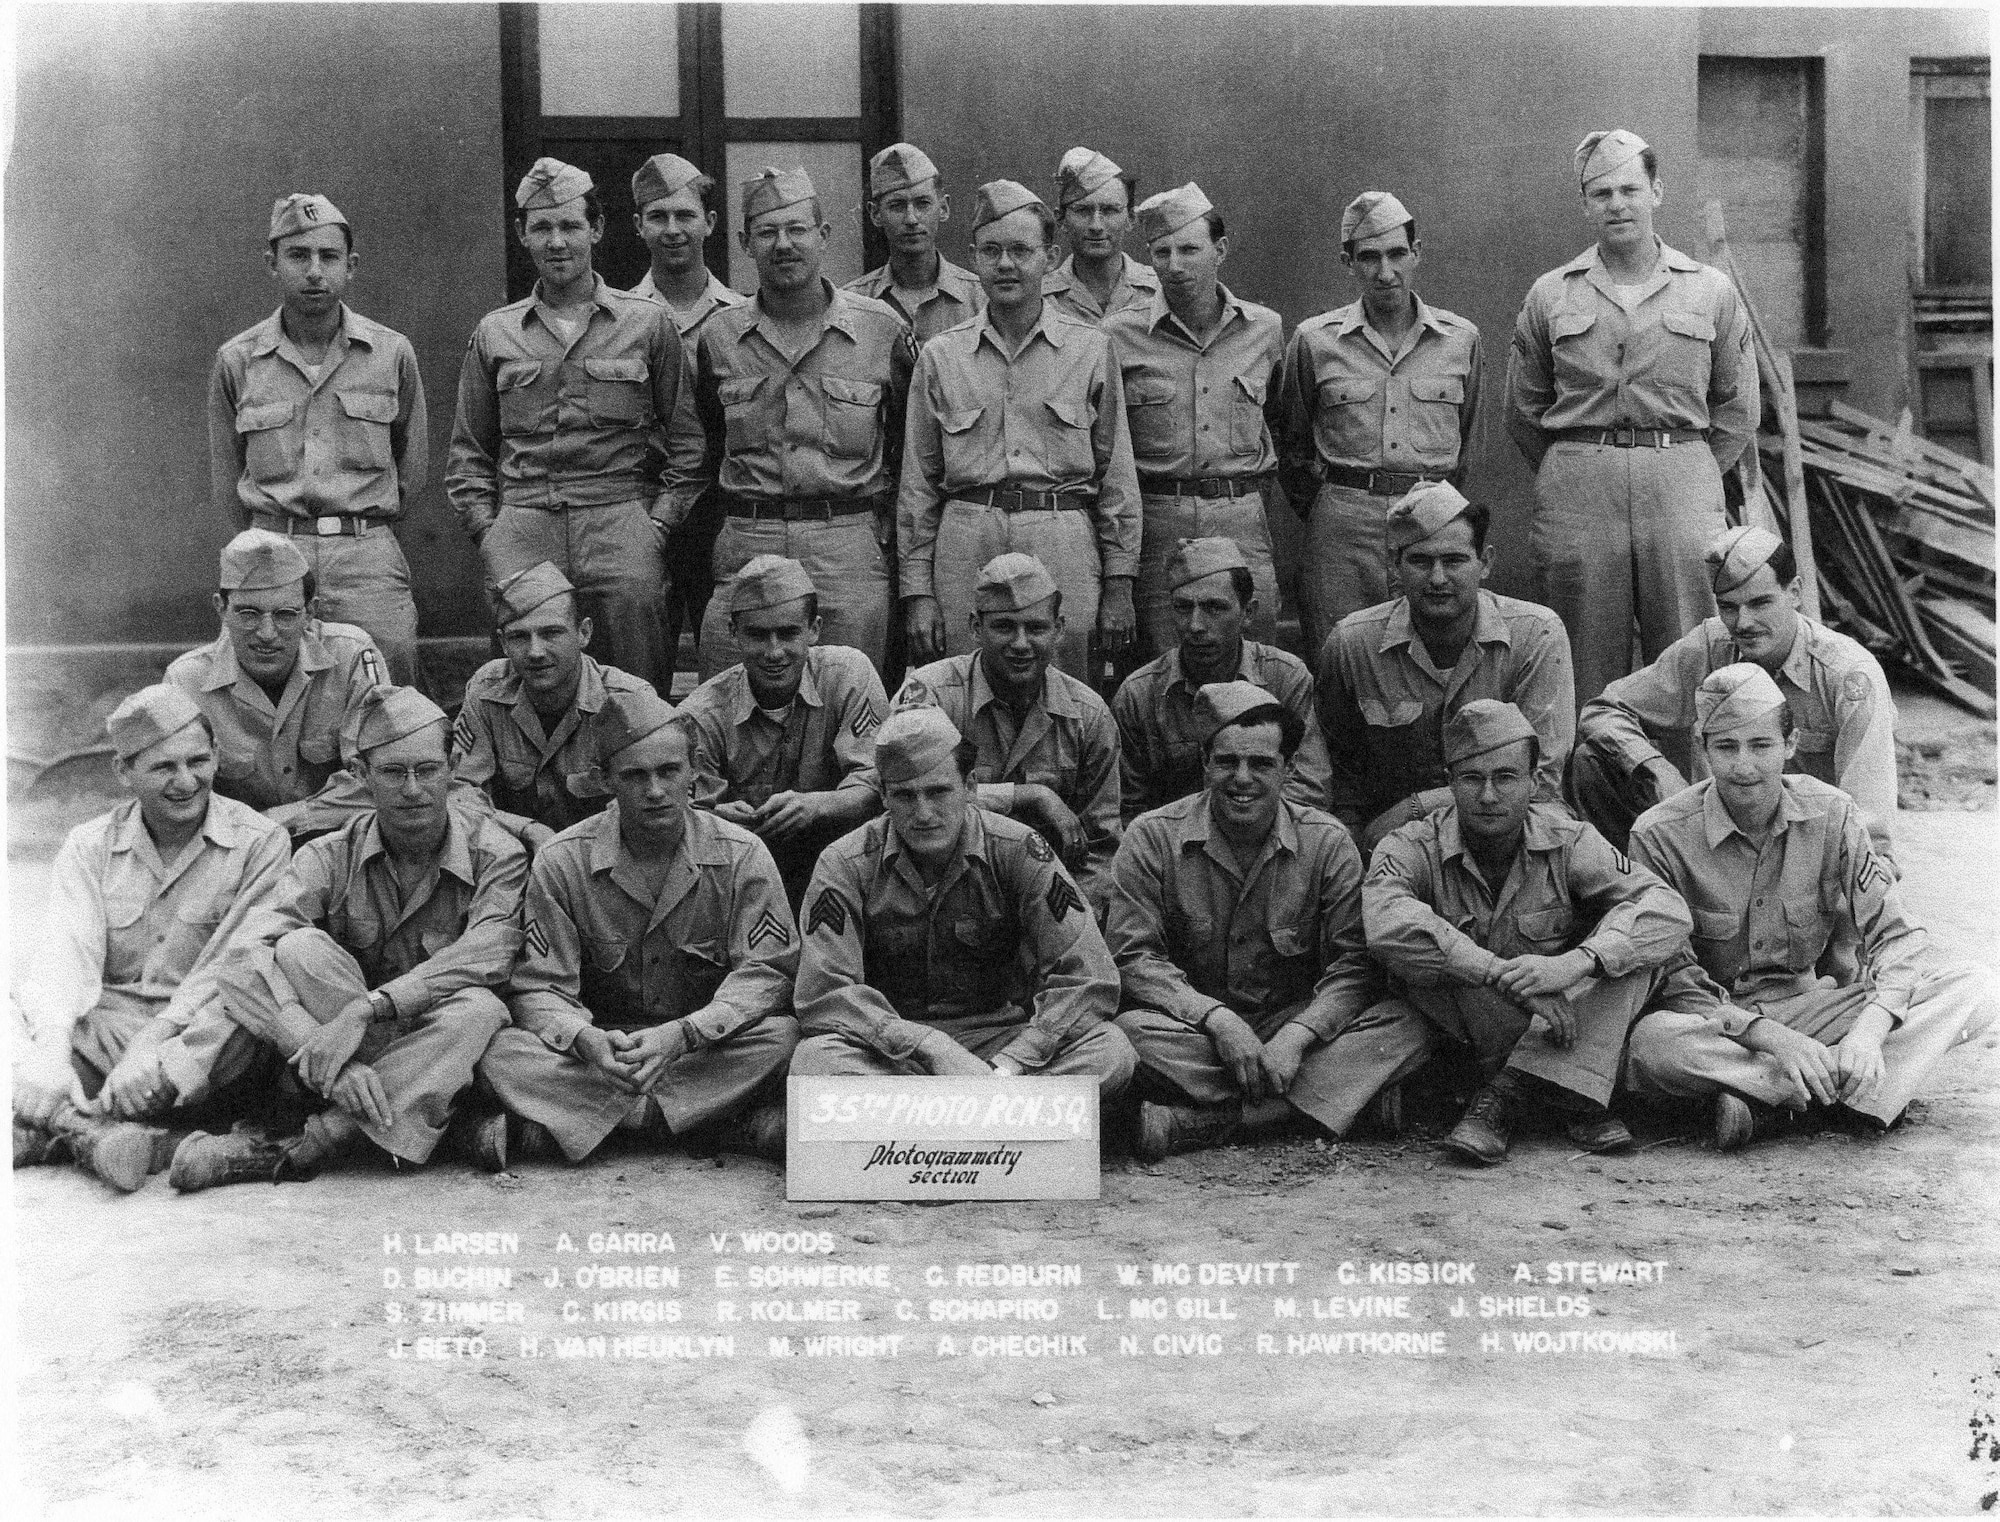 Members of the Redhawks, in the 35th Photo Reconnaissance Squadron’s Photogrammetry Section, pose for a photo at Kunming, China, in October of 1944, shortly after arriving in-country.  H. Allen Larsen is seen at left in the very back row.